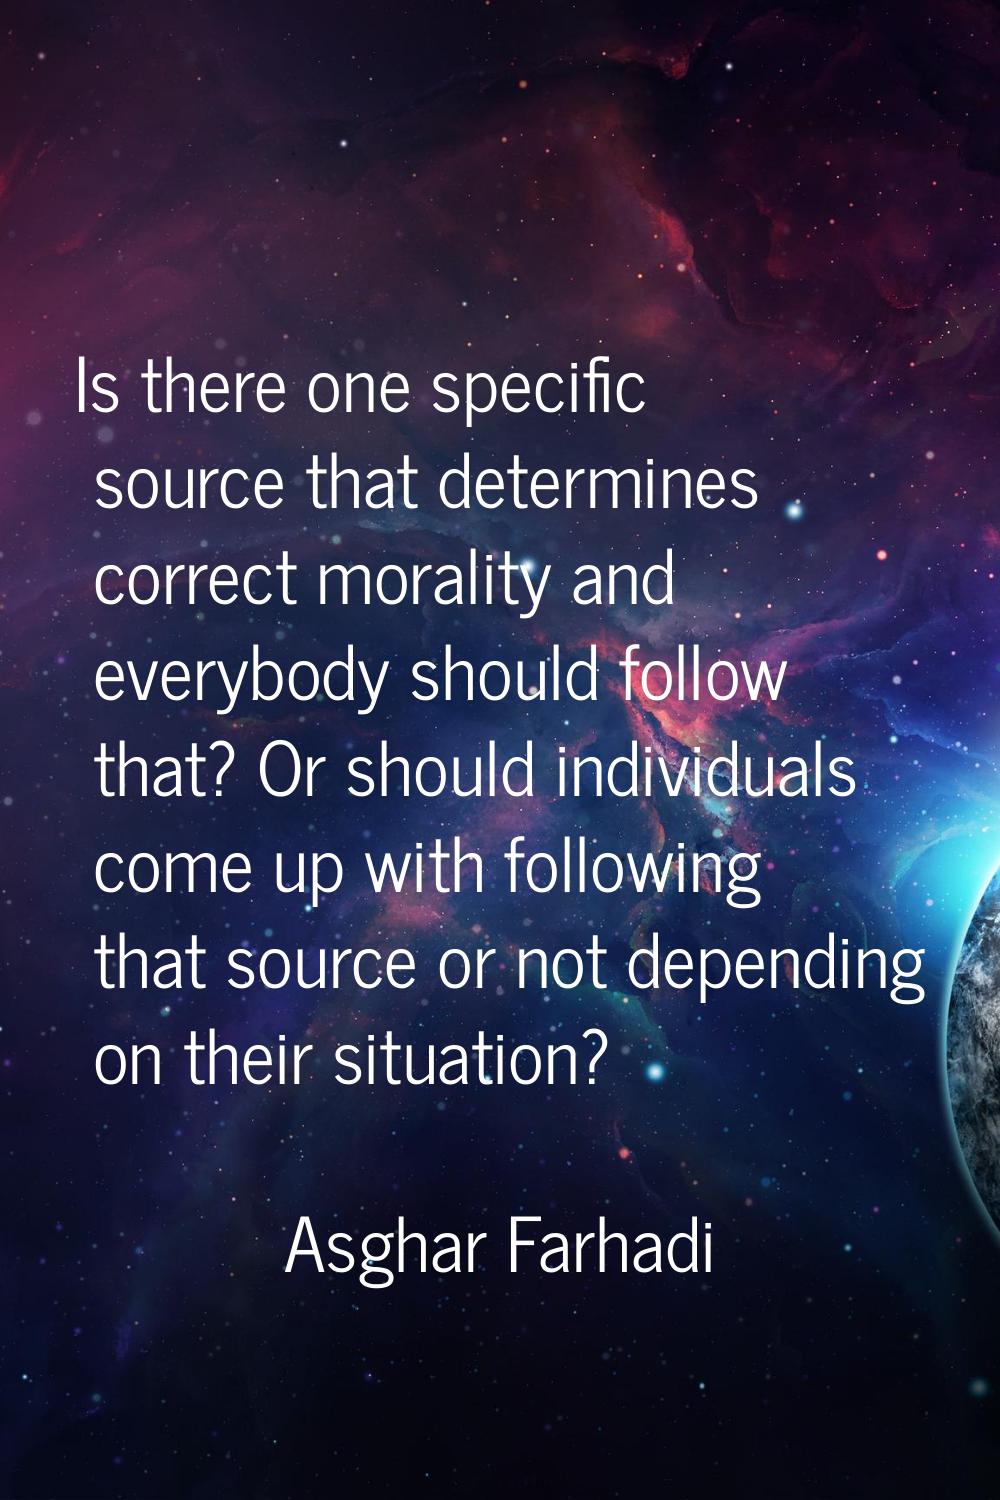 Is there one specific source that determines correct morality and everybody should follow that? Or 